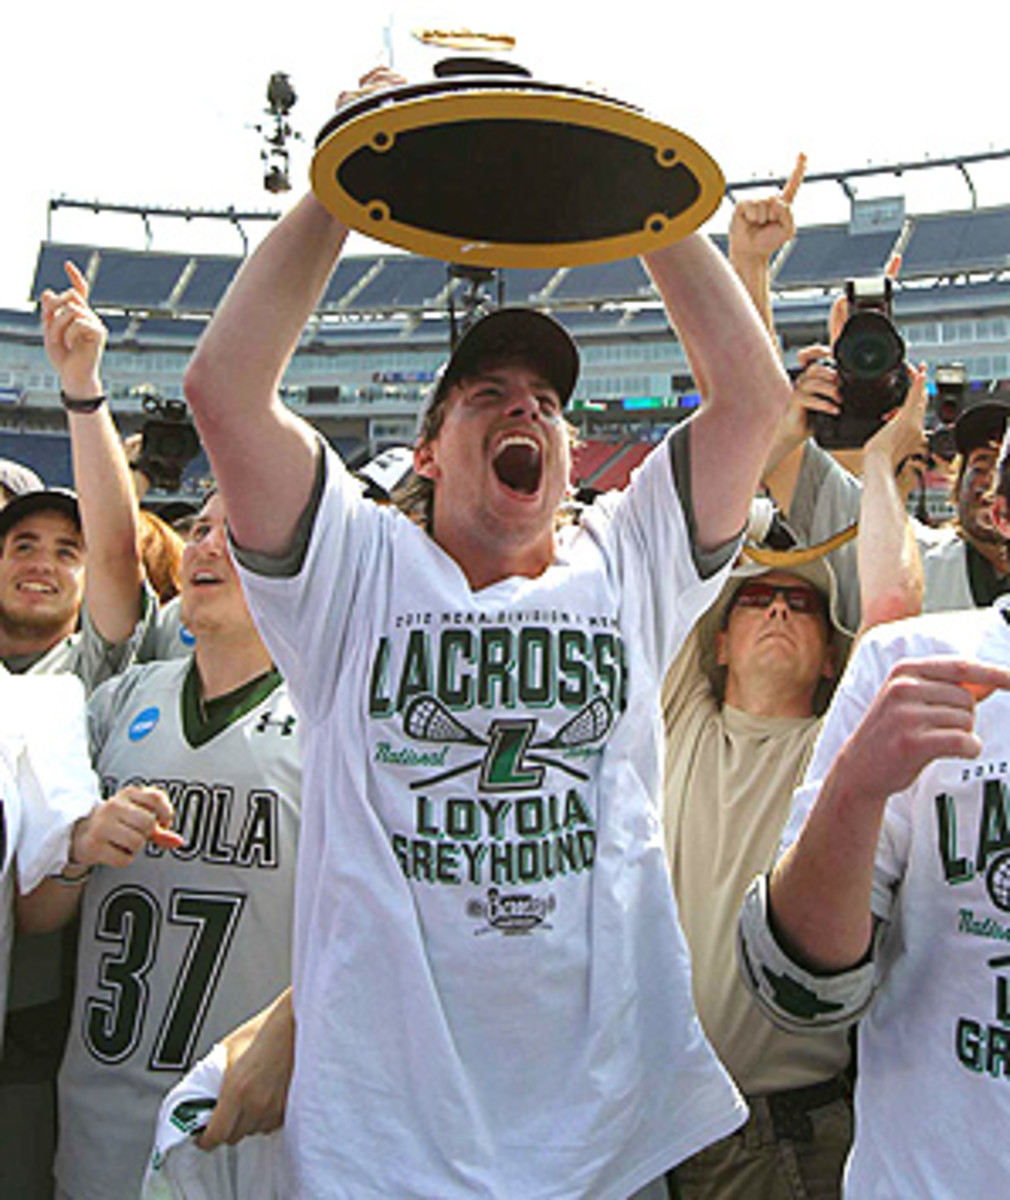 The Loyola (Md.) Greyhounds celebrate their first NCAA lacrosse championship. The team beat Maryland 9-3 in the finals.